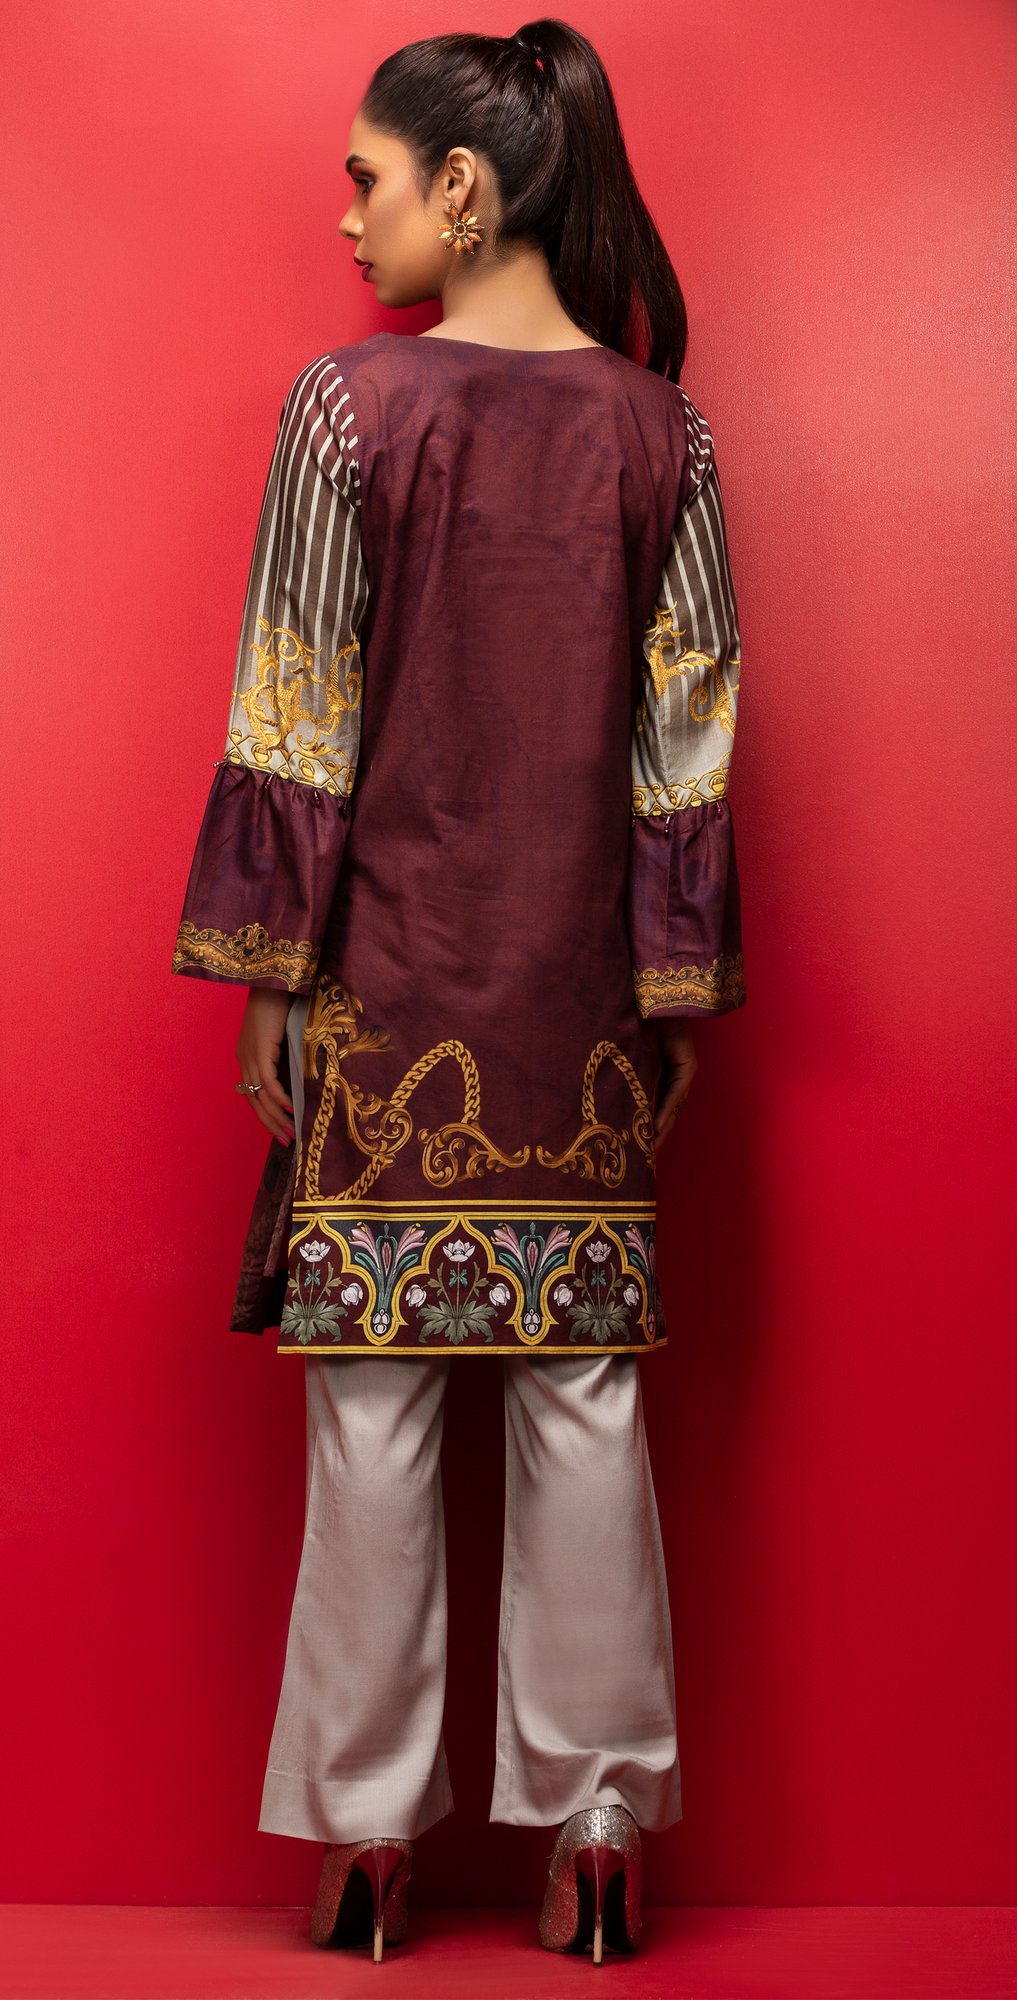 /2019/06/salitex-stitched-digital-printed-embroidered-lawn-kurta-with-embellishments-1pc-casual-pret-cp-06-image2.jpeg